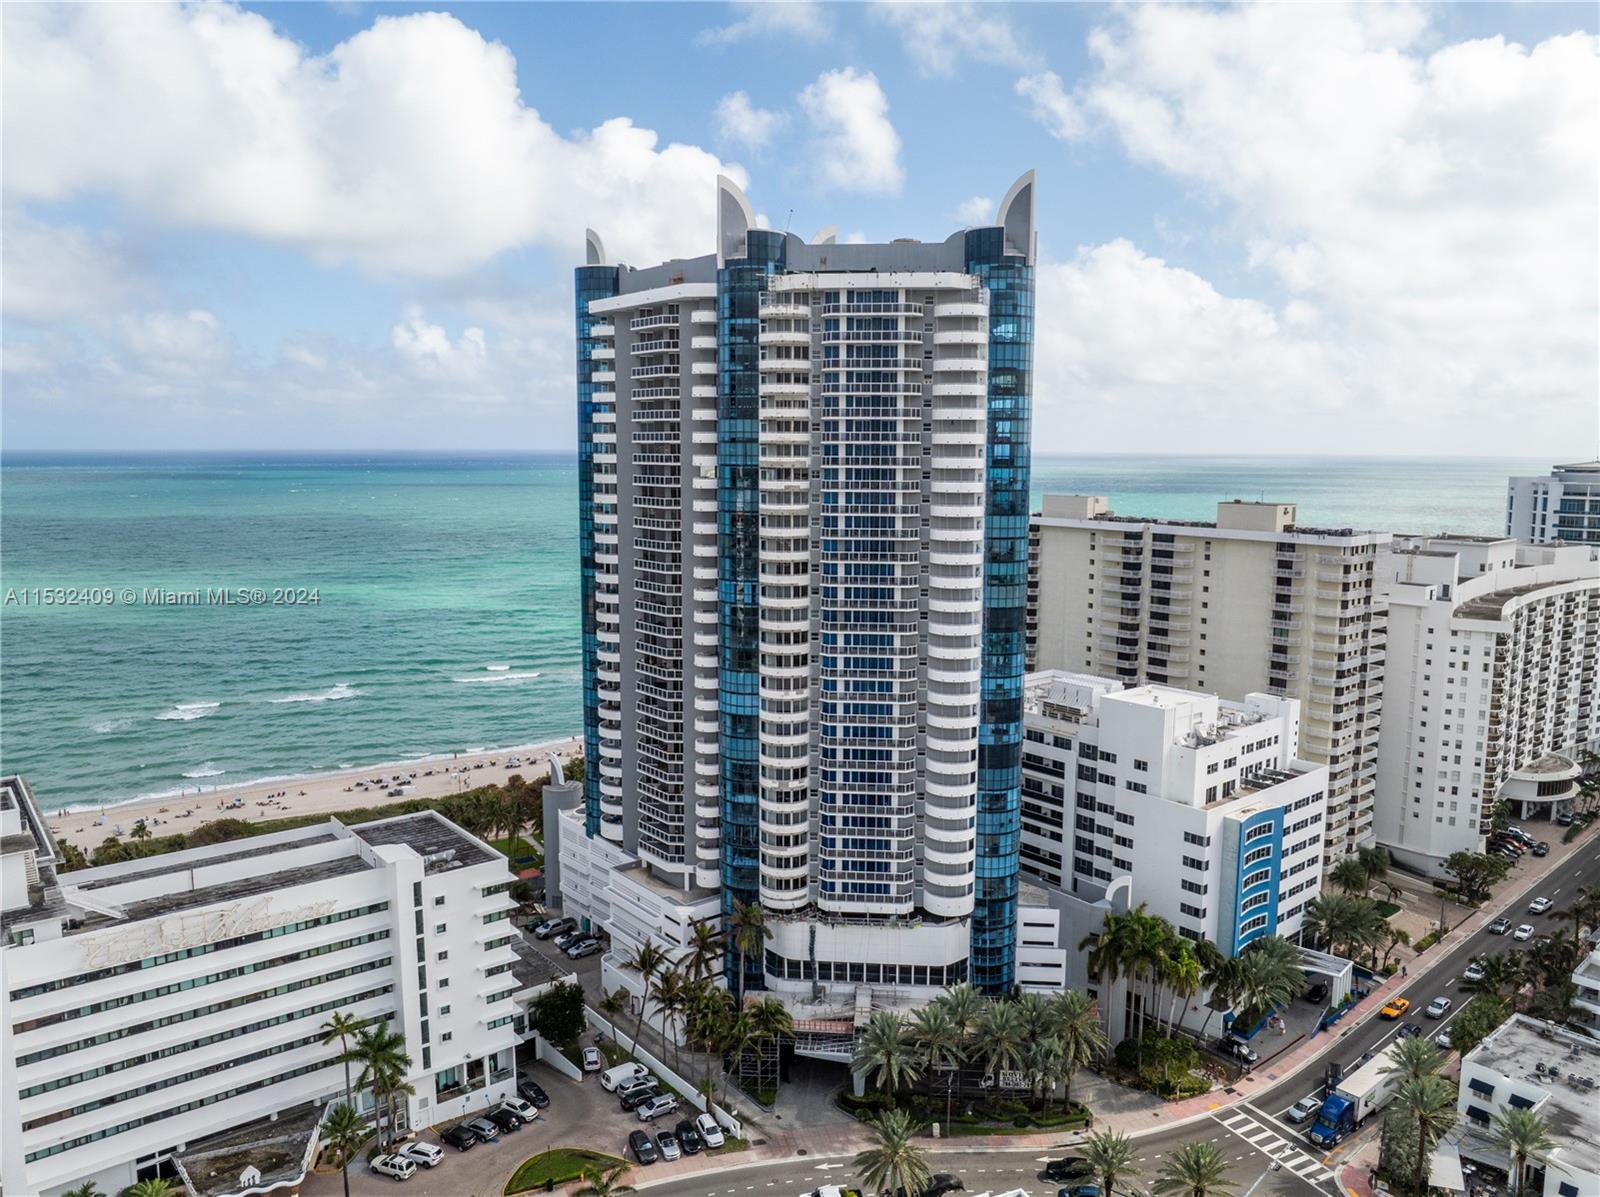 Amazing panoramic views of the Ocean and Intercostal from this remodeled 2 bed/2 baths unit at luxurious La Gorce Palace. The highly desirable “08” line has the largest balcony and this unit has 2 parking spots & beach storage locker! Unit has a spacious and open layout, a brand-new kitchen, floor to ceiling glass, huge master suite w/ walk in closet, travertine stone floors & brand new W+D in-unit. 
State of the art amenities including beach service w/ umbrellas & lounge chairs, 24-hour concierge, valet parking, Bike, Surf & Paddle board storage, private covered BBQ area, gym, sauna, steam room, party room w/ billiard table & bar, spa & child playground area. Walking distance to shops, restaurants, Publix & more. Short drive to Lincoln Rd, South Beach, Midtown, Design District & Wynwood.